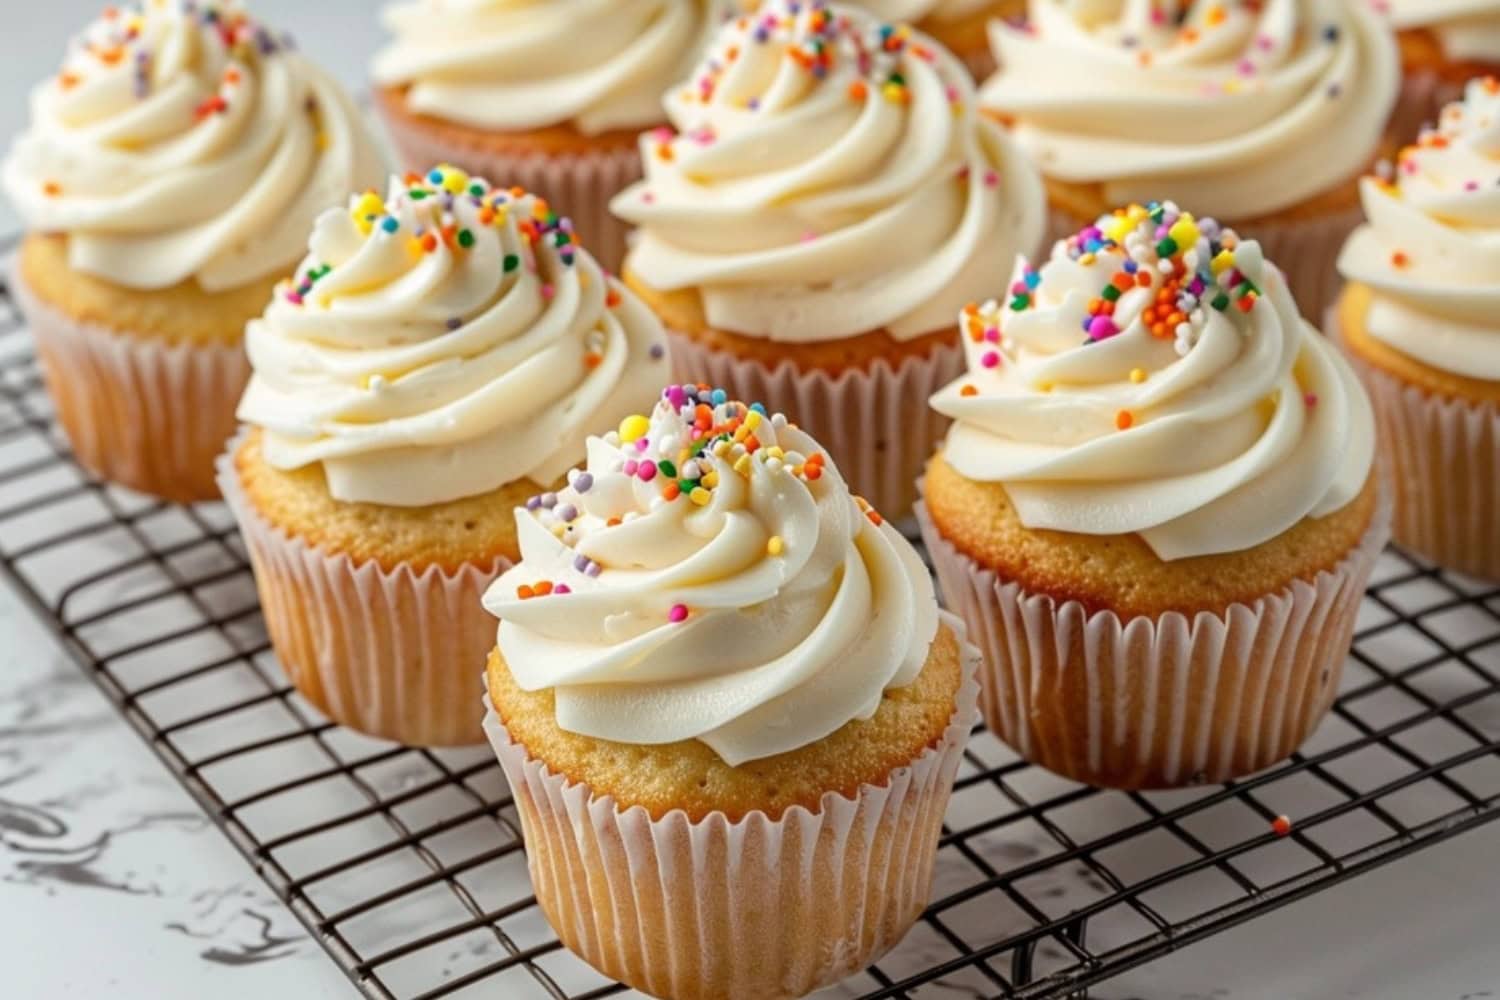 Vanilla cupcakes in cooling rack garnished with buttercream frosting and candy sprinkles.